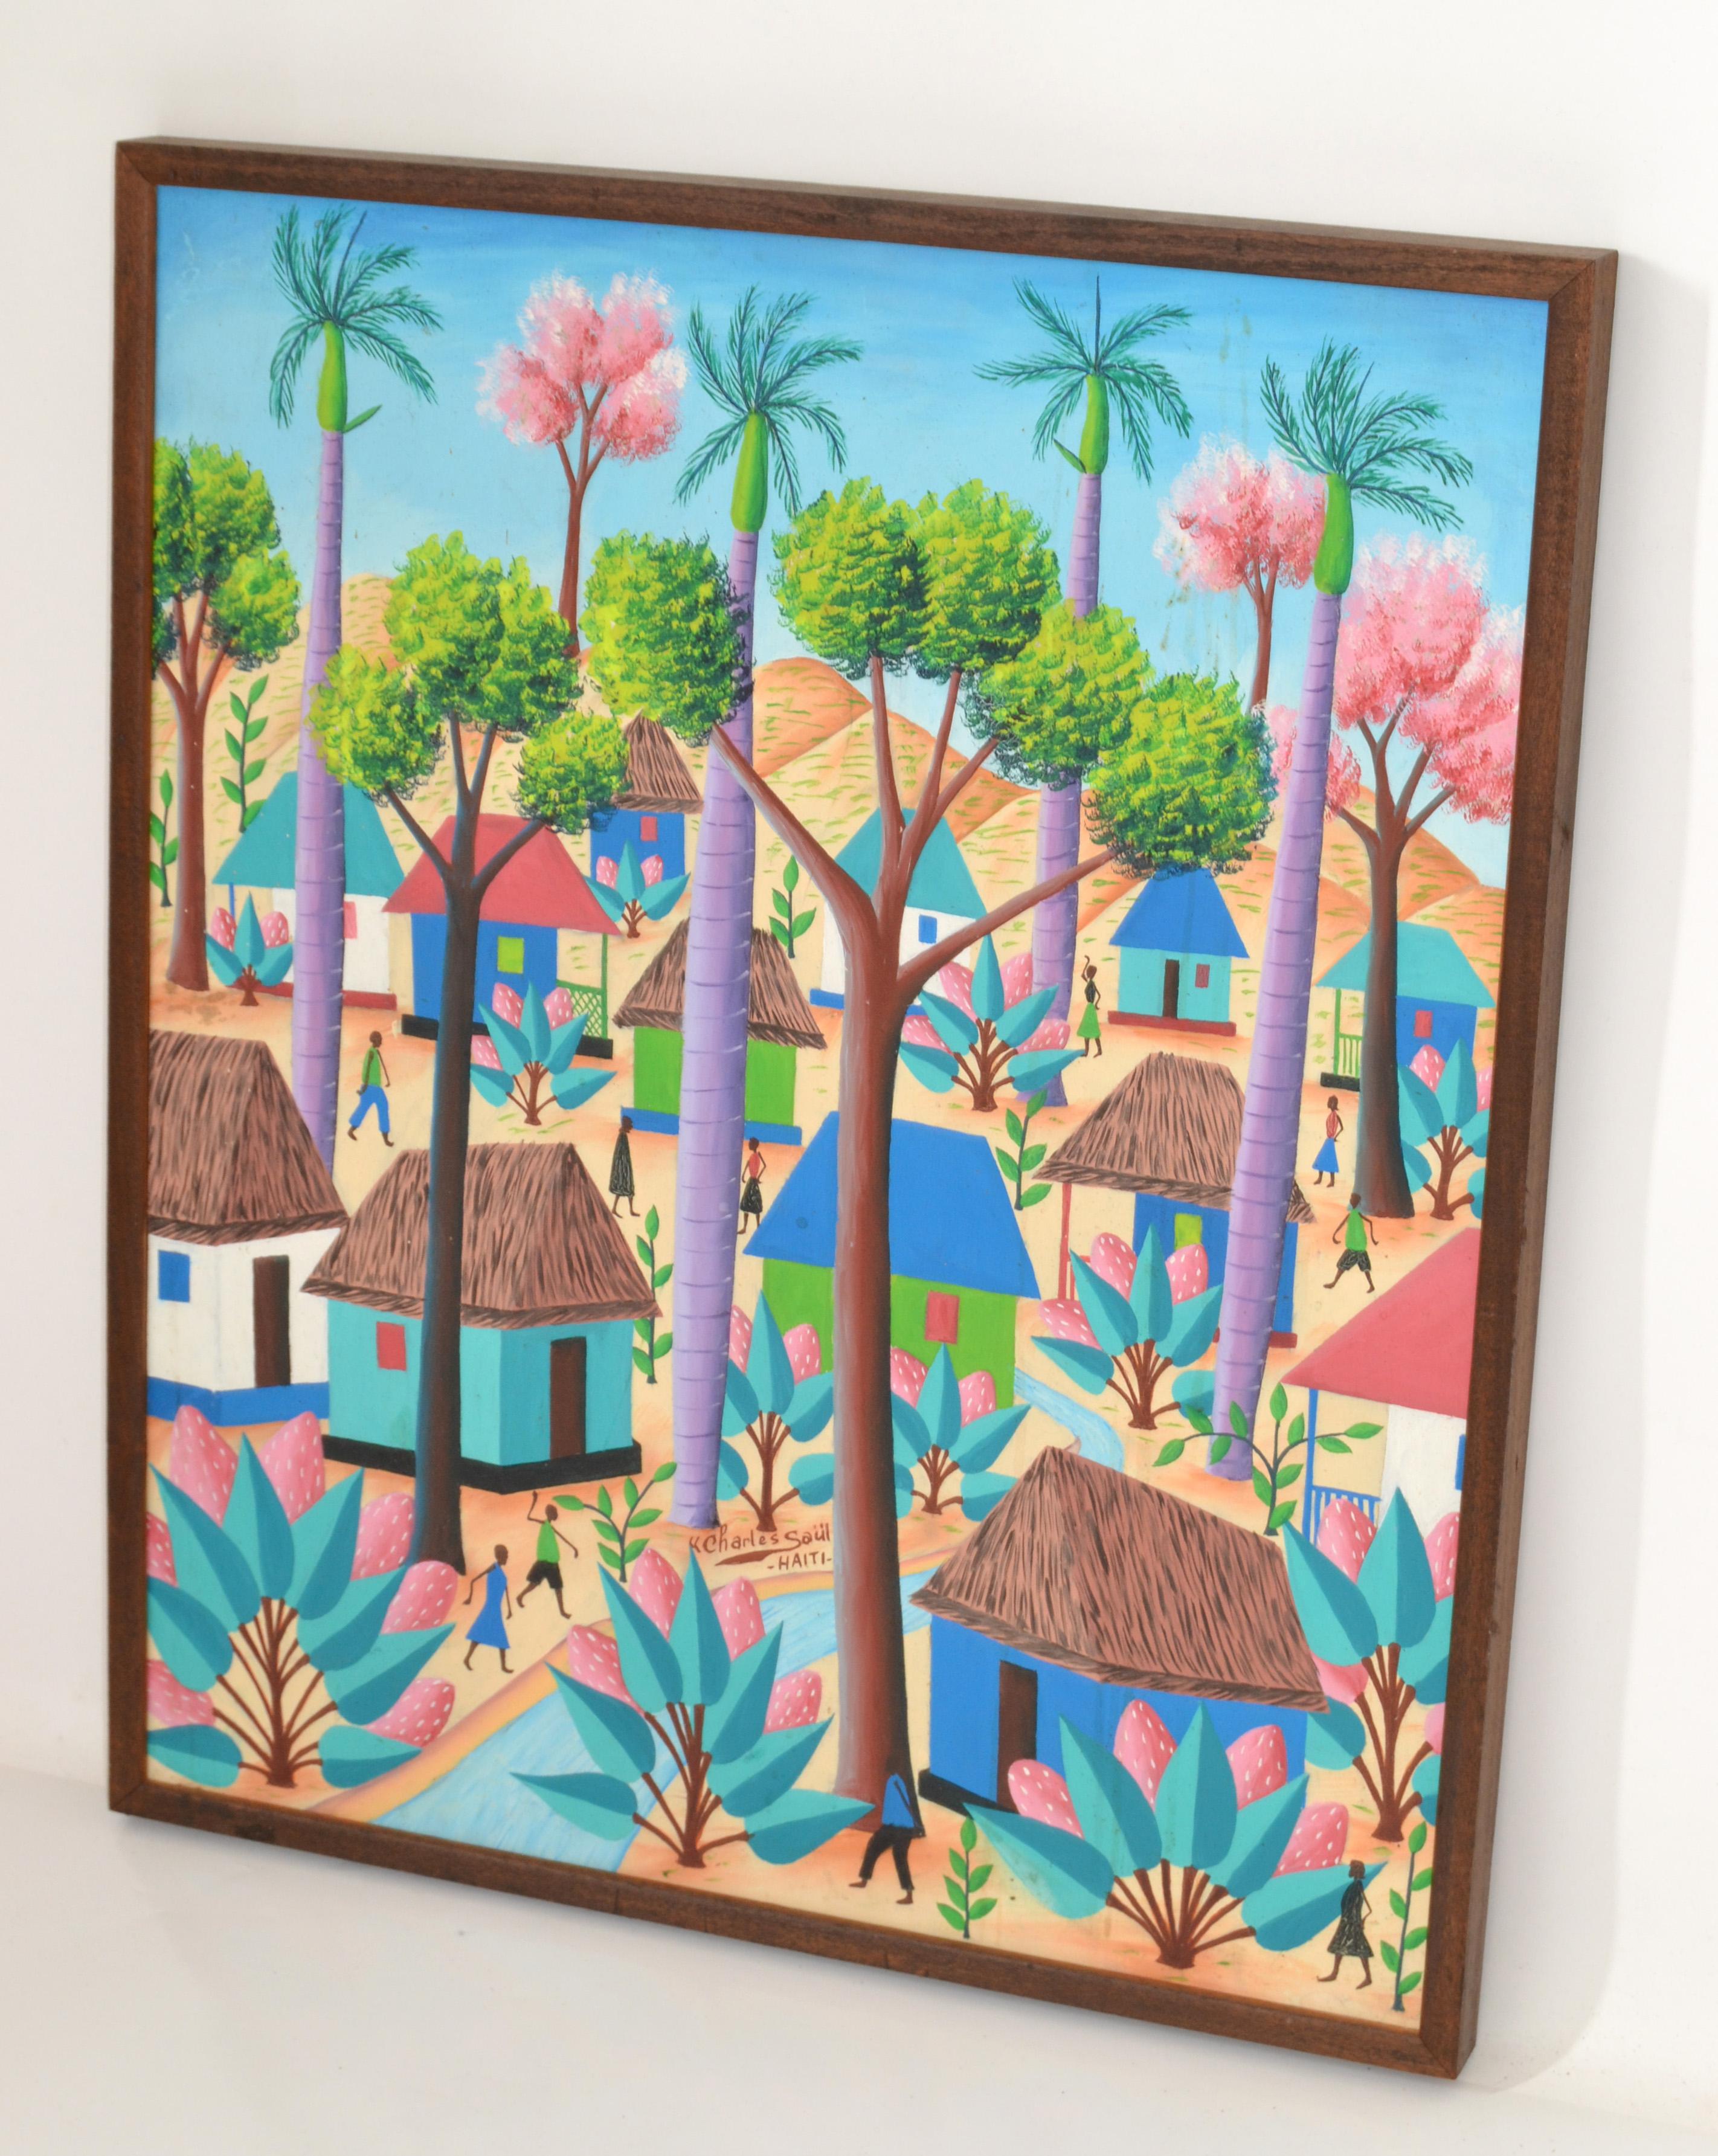 An original framed acrylic on canvas painting of a Haitian village scene with people going back and forth, huts, and tall foliage and palm trees. 
Signed by Charles Saül (Haitian, 1943 - ), and made In Haiti in the 1970.
Good vintage condition